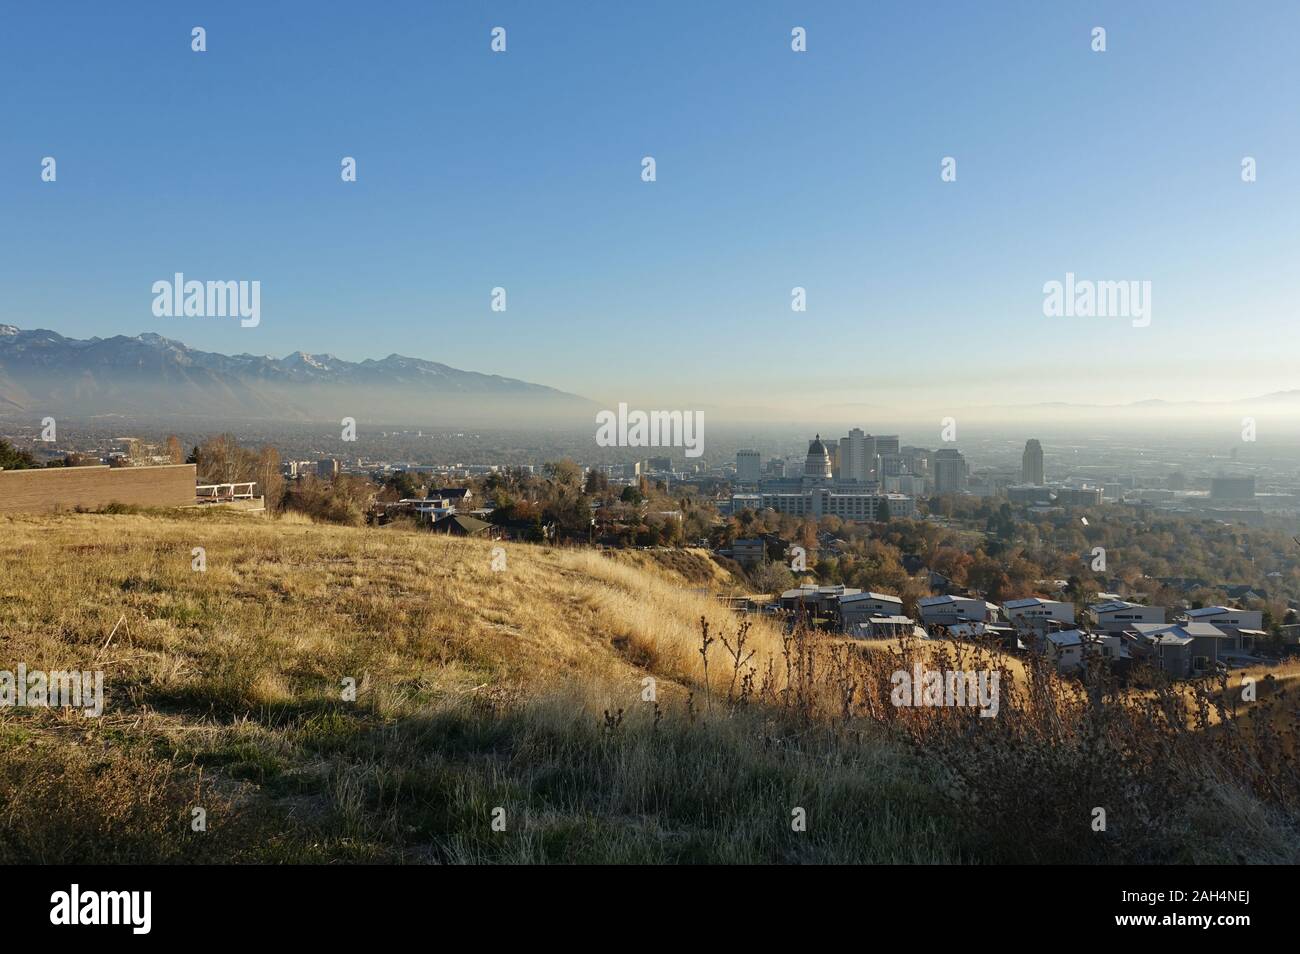 Landscape view of the Utah State Capitol Building and Salt Lake City, Utah, seen from the Ensign Peak Stock Photo